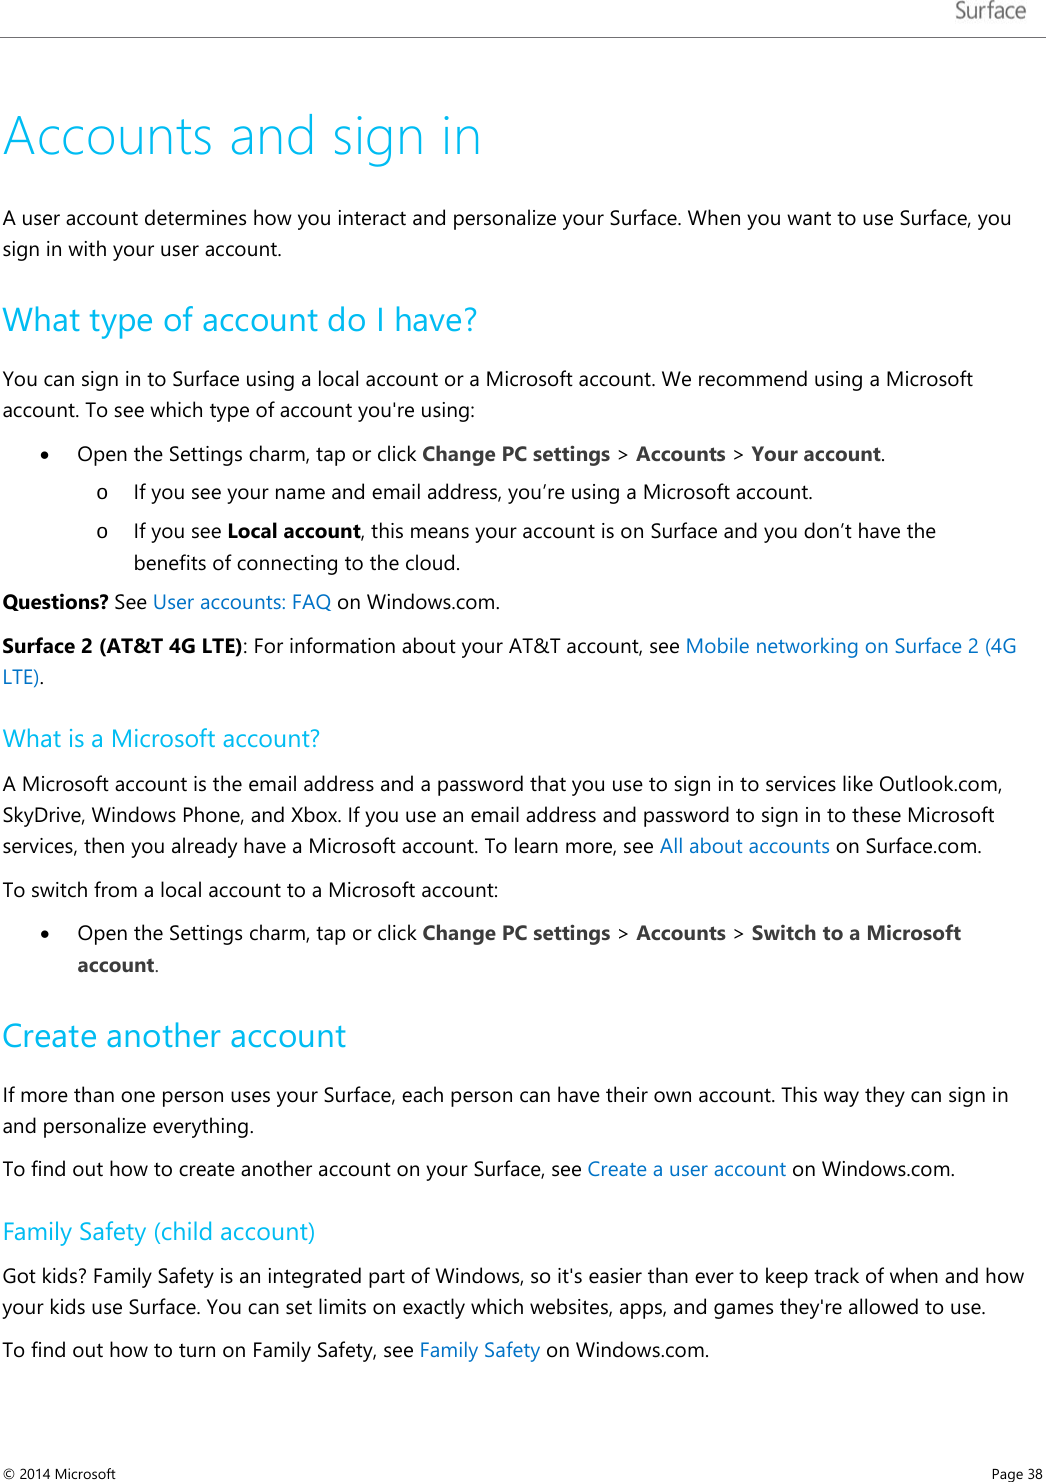   Accounts and sign in A user account determines how you interact and personalize your Surface. When you want to use Surface, you sign in with your user account. What type of account do I have? You can sign in to Surface using a local account or a Microsoft account. We recommend using a Microsoft account. To see which type of account you&apos;re using: • Open the Settings charm, tap or click Change PC settings &gt; Accounts &gt; Your account. o If you see your name and email address, you’re using a Microsoft account.  o If you see Local account, this means your account is on Surface and you don’t have the benefits of connecting to the cloud.  Questions? See User accounts: FAQ on Windows.com. Surface 2 (AT&amp;T 4G LTE): For information about your AT&amp;T account, see Mobile networking on Surface 2 (4G LTE). What is a Microsoft account? A Microsoft account is the email address and a password that you use to sign in to services like Outlook.com, SkyDrive, Windows Phone, and Xbox. If you use an email address and password to sign in to these Microsoft services, then you already have a Microsoft account. To learn more, see All about accounts on Surface.com.  To switch from a local account to a Microsoft account: • Open the Settings charm, tap or click Change PC settings &gt; Accounts &gt; Switch to a Microsoft account. Create another account If more than one person uses your Surface, each person can have their own account. This way they can sign in and personalize everything.  To find out how to create another account on your Surface, see Create a user account on Windows.com.  Family Safety (child account) Got kids? Family Safety is an integrated part of Windows, so it&apos;s easier than ever to keep track of when and how your kids use Surface. You can set limits on exactly which websites, apps, and games they&apos;re allowed to use.  To find out how to turn on Family Safety, see Family Safety on Windows.com. © 2014 Microsoft     Page 38  